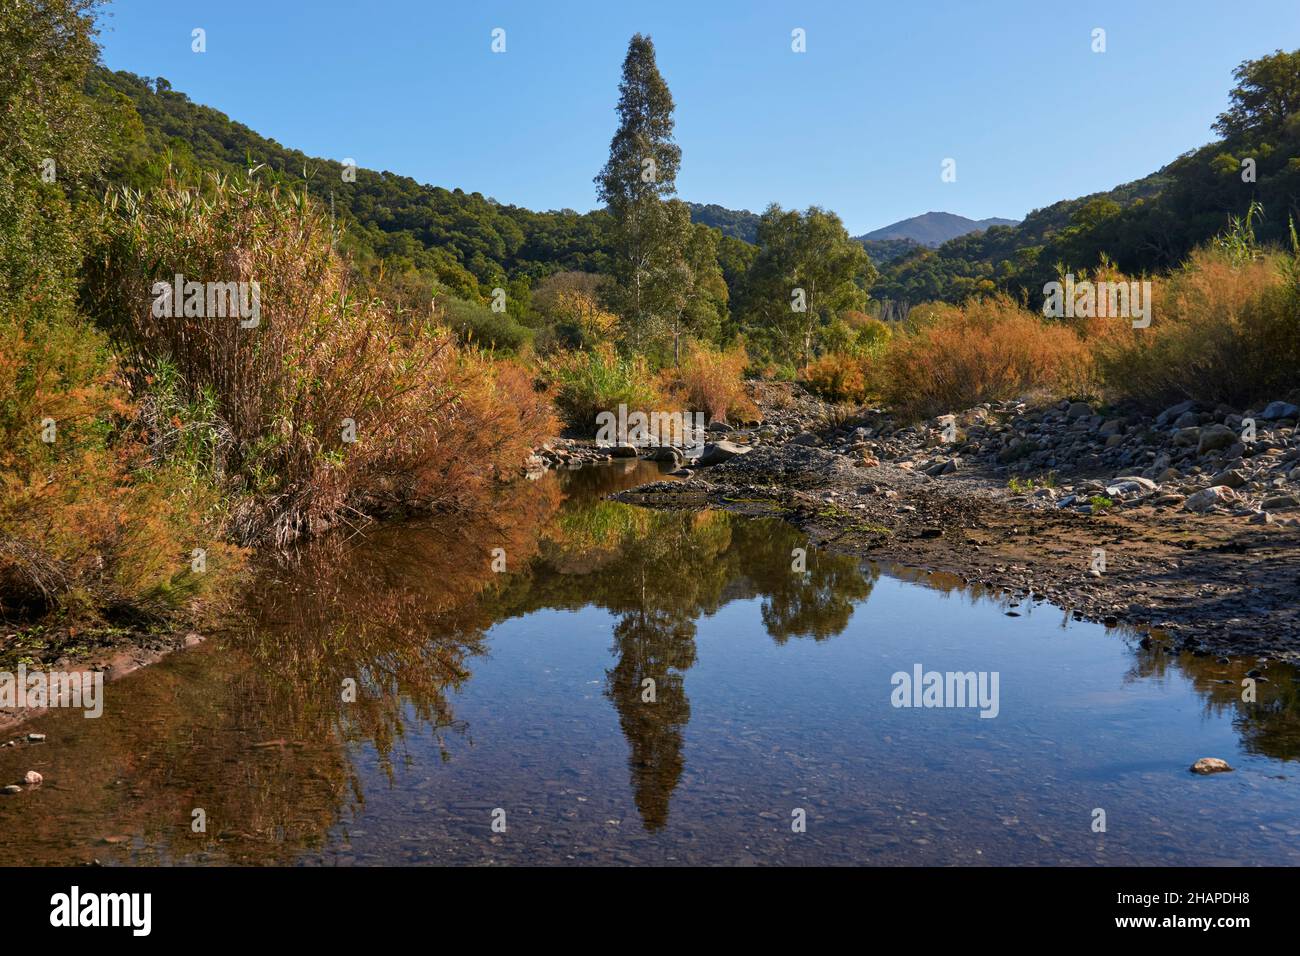 Autumn landscape in the Genal valley in the province of Malaga. Andalusia, Spain Stock Photo